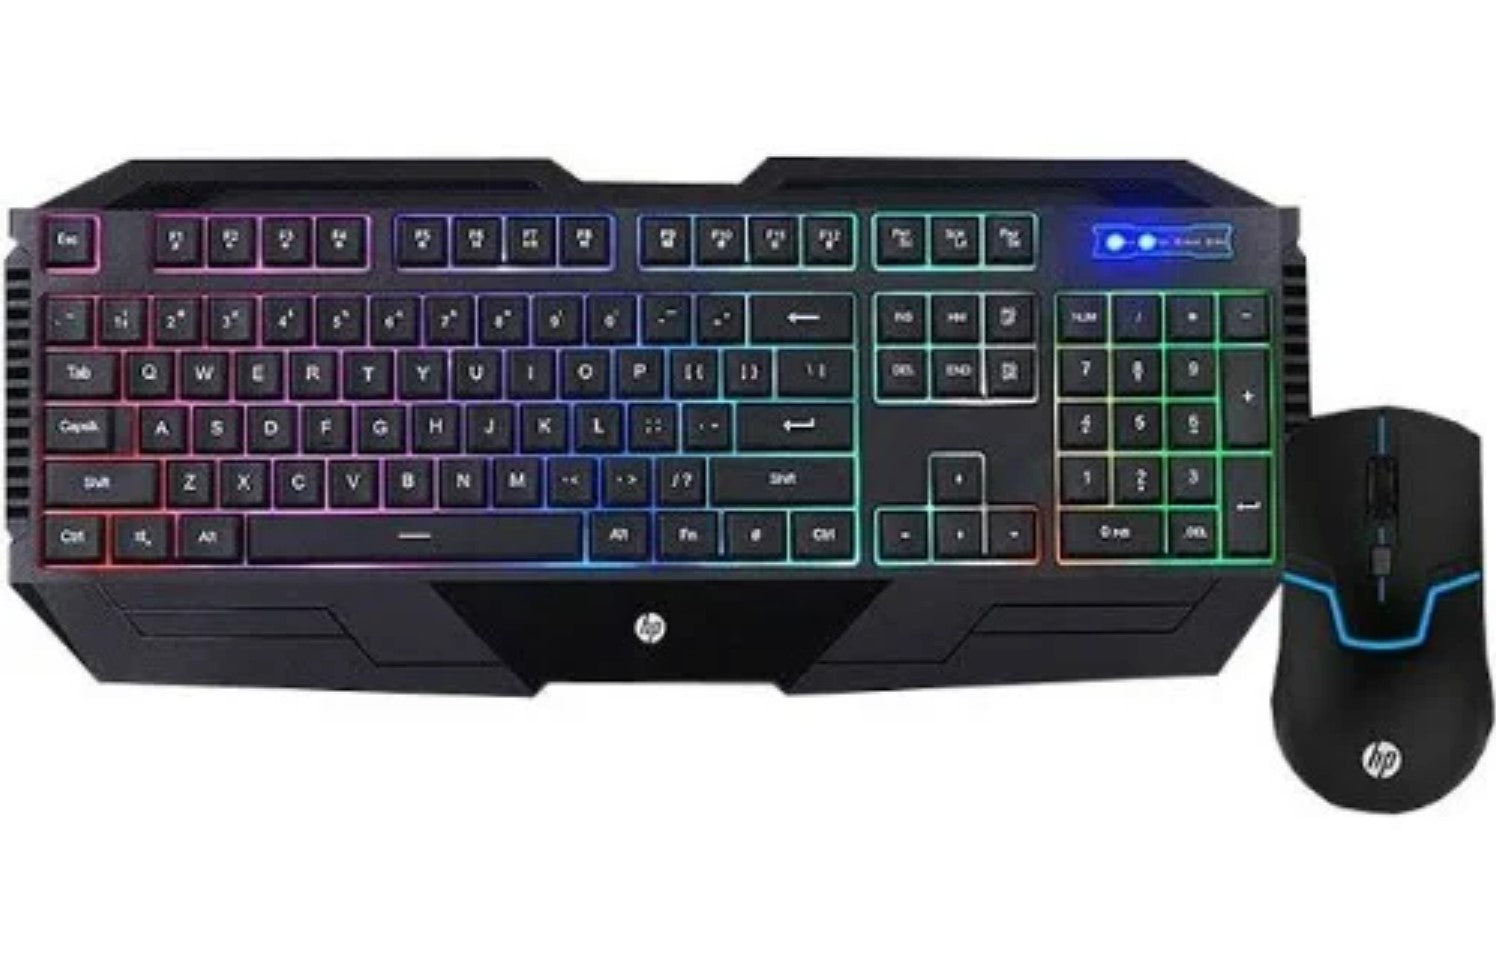 HP GK1100 Gaming Gear Combo Keyboard + Mouse 6 Color LED Back Light